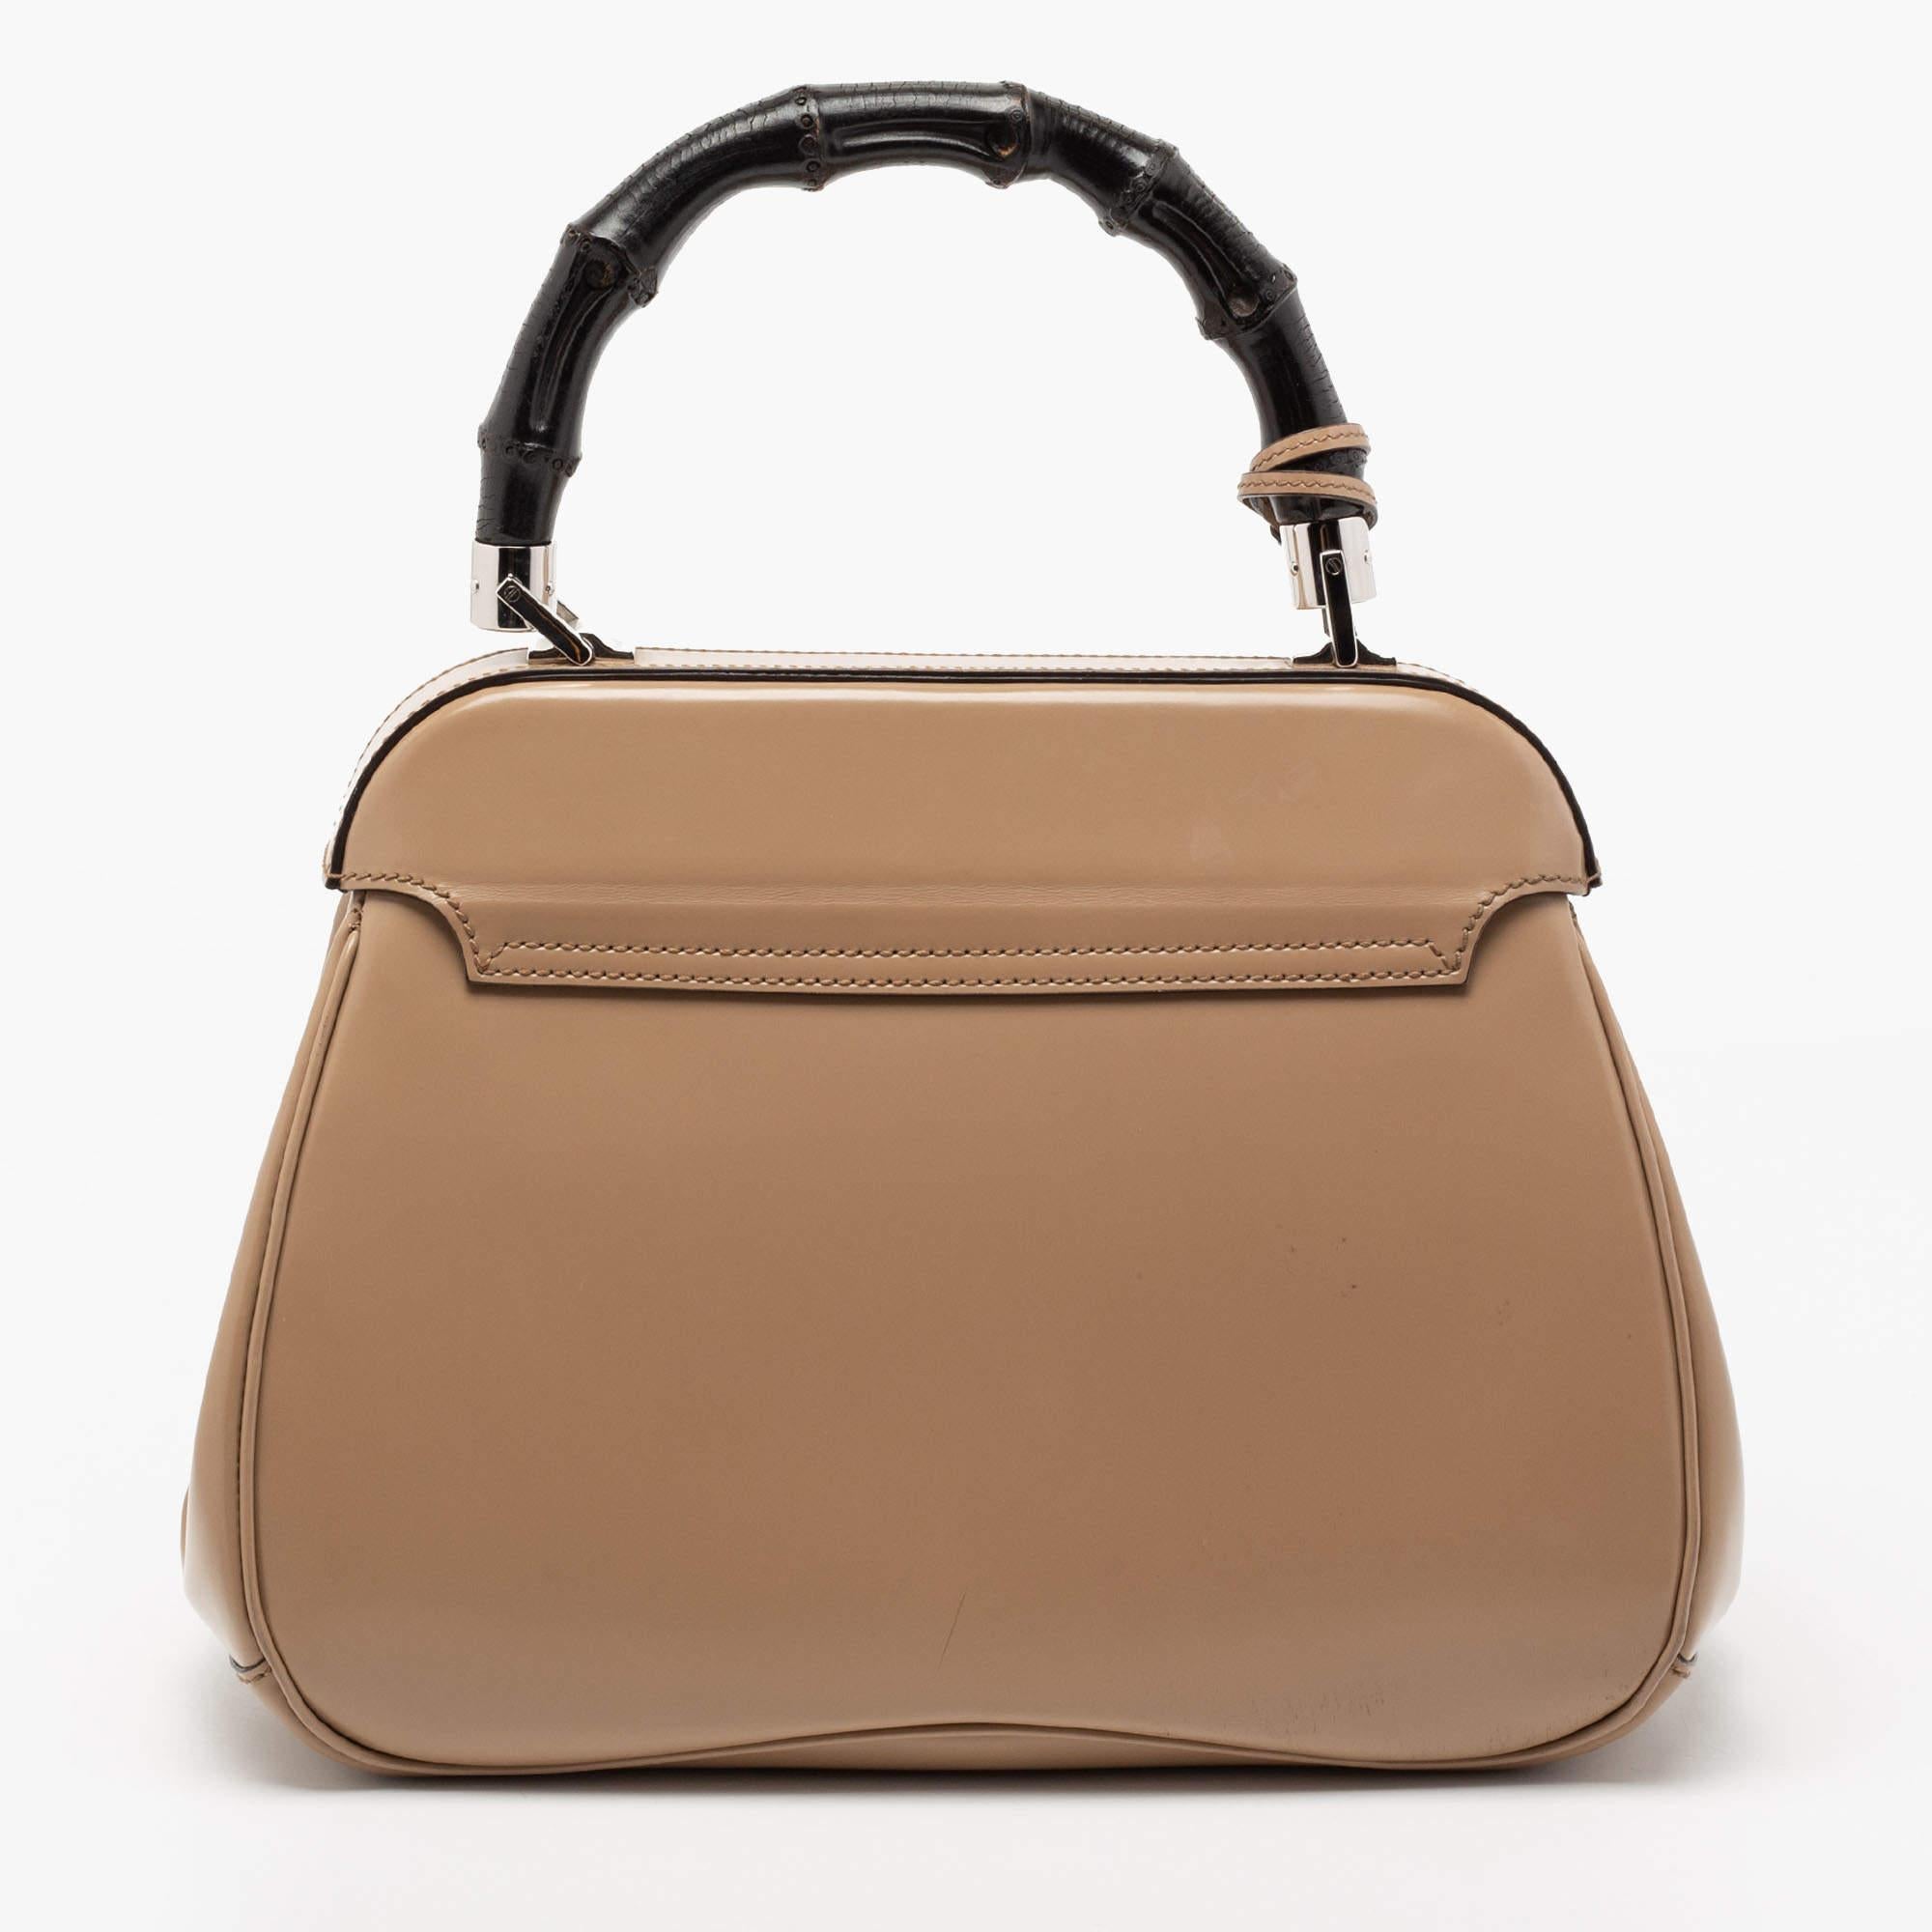 A lovely silhouette and minimal details make this handbag from Gucci a covetable piece! It is made of leather and features a silver-tone metal lock on the flap and a luxurious bamboo handle on top. The bag opens to a suede-lined interior.

Includes: